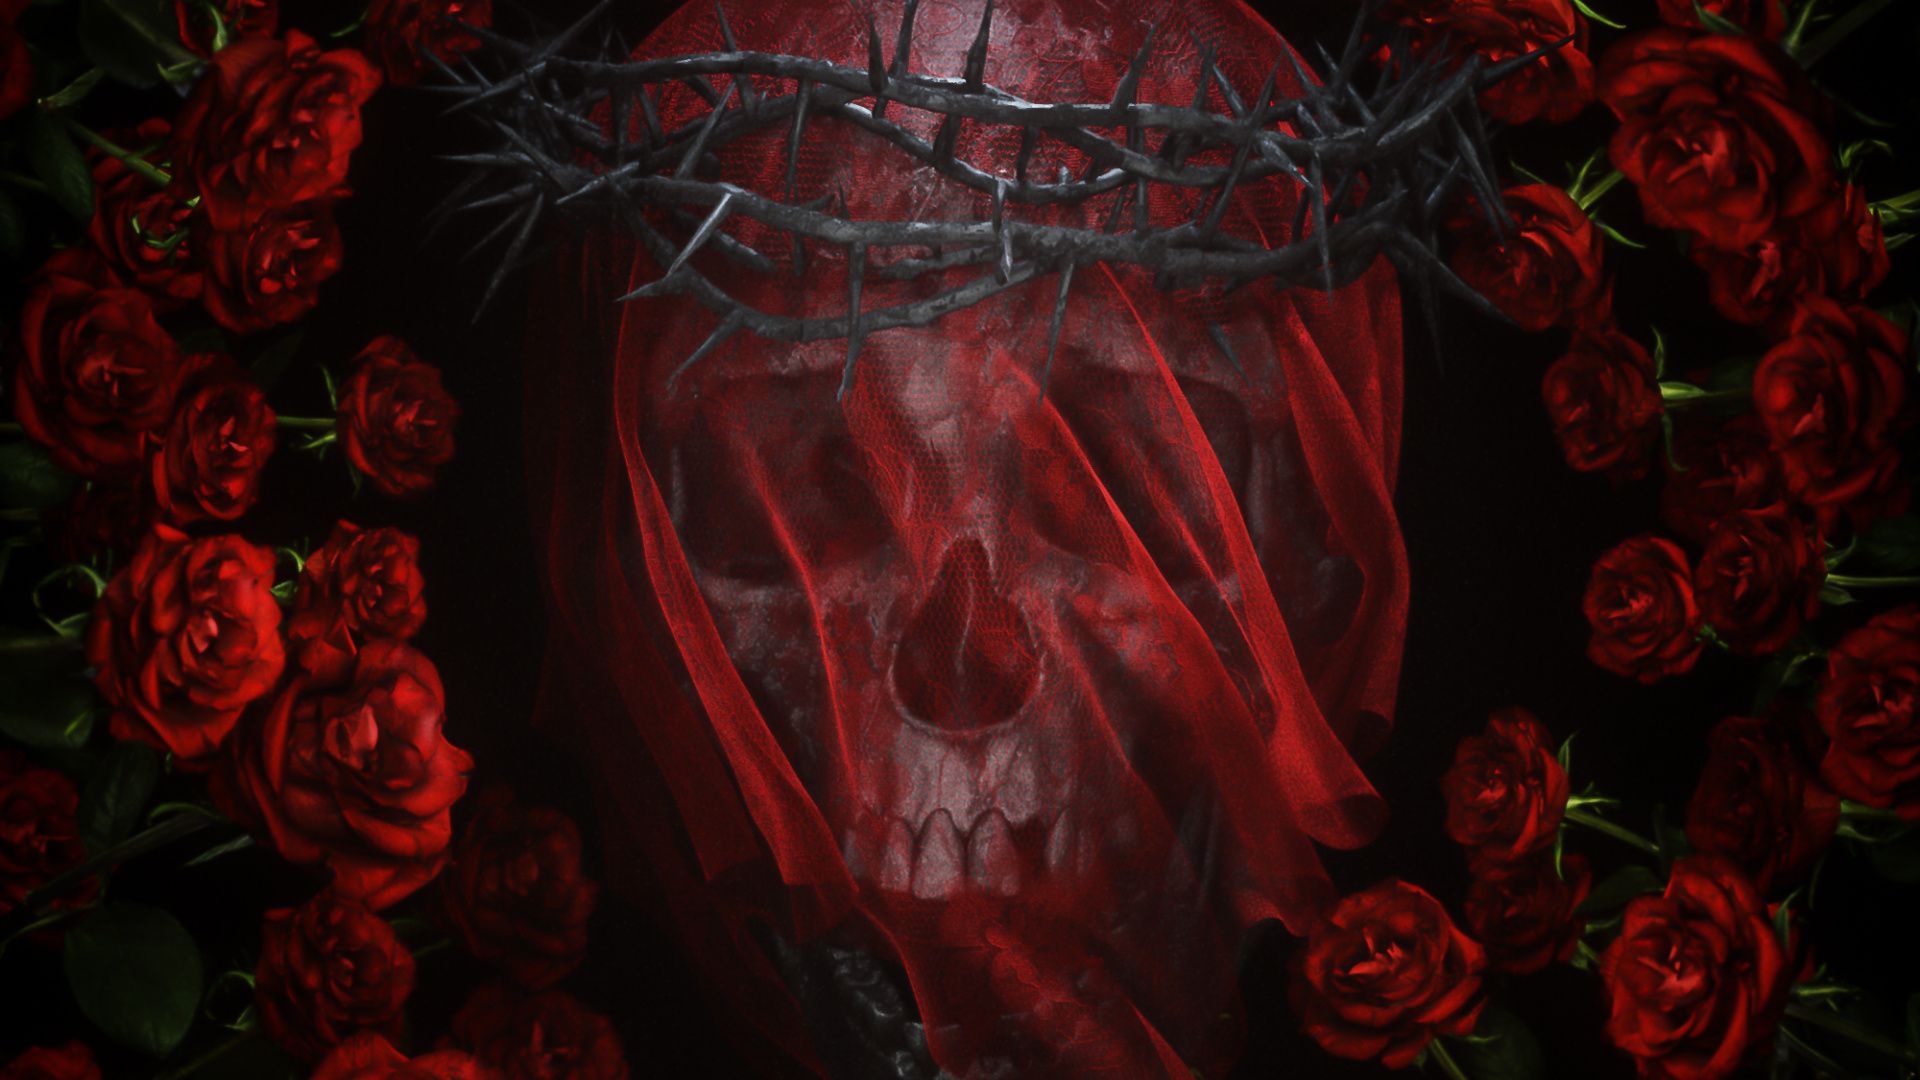 Download Skull and roses, thorns crown wallpaper, 1920x Full HD, HDTV, FHD, 1080p